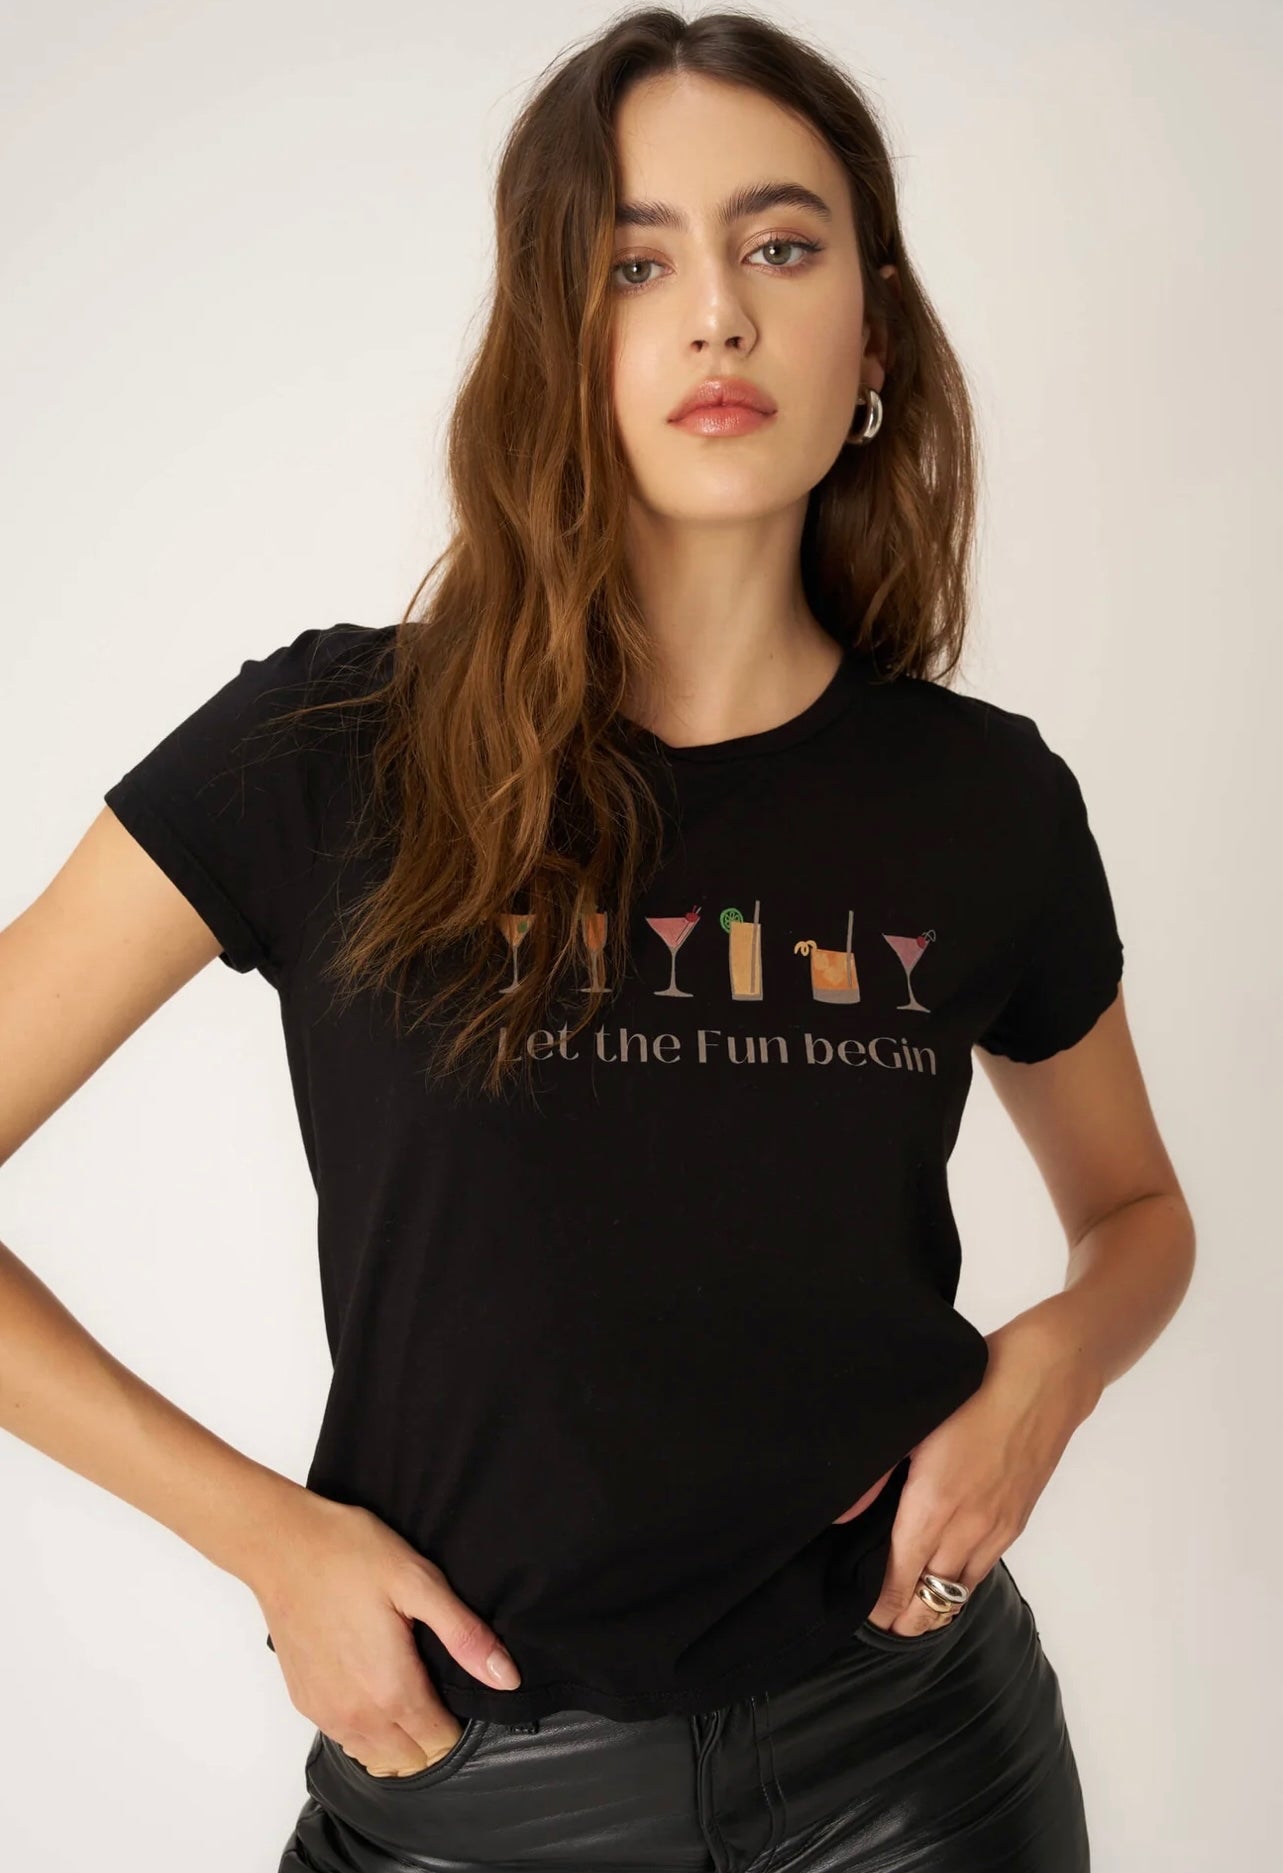 Project Social T Blk Let the fun Begin Tee